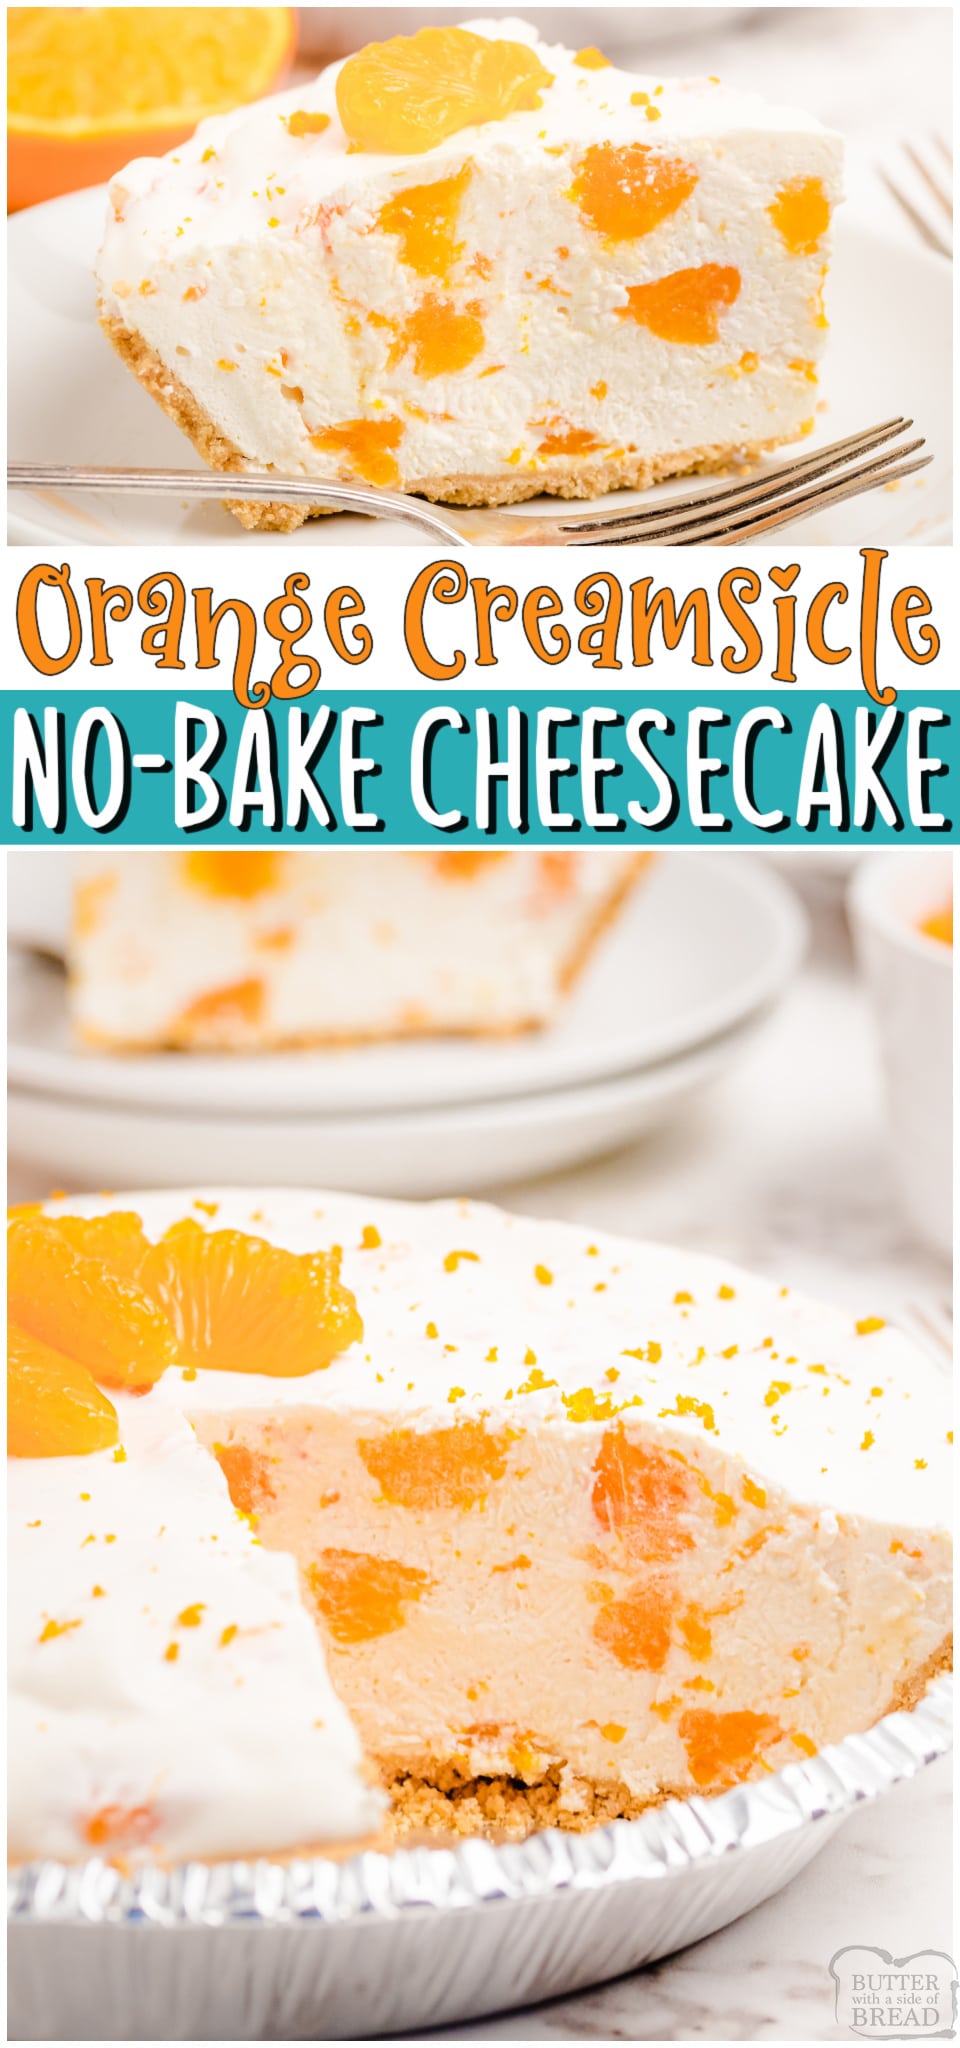 Orange Creamsicle Cheesecake made with cream cheese, oranges, whipped topping and orange juice! Simple & creamy no-bake cheesecake recipe with a lovely citrus flavor!